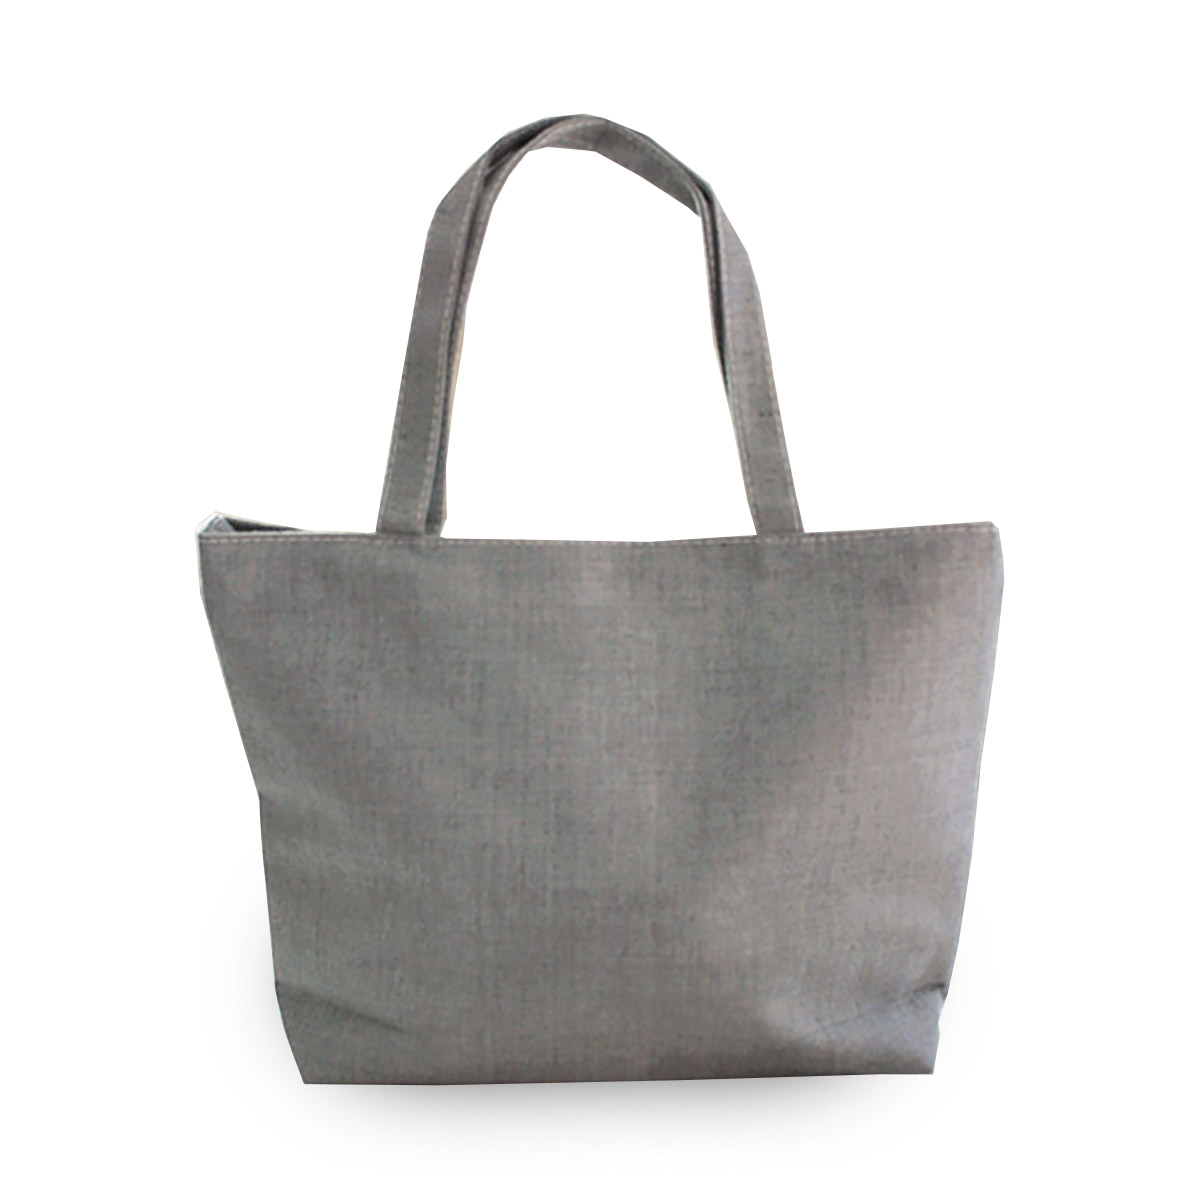 Lined Tote bag with beautiful linen bow embellishment